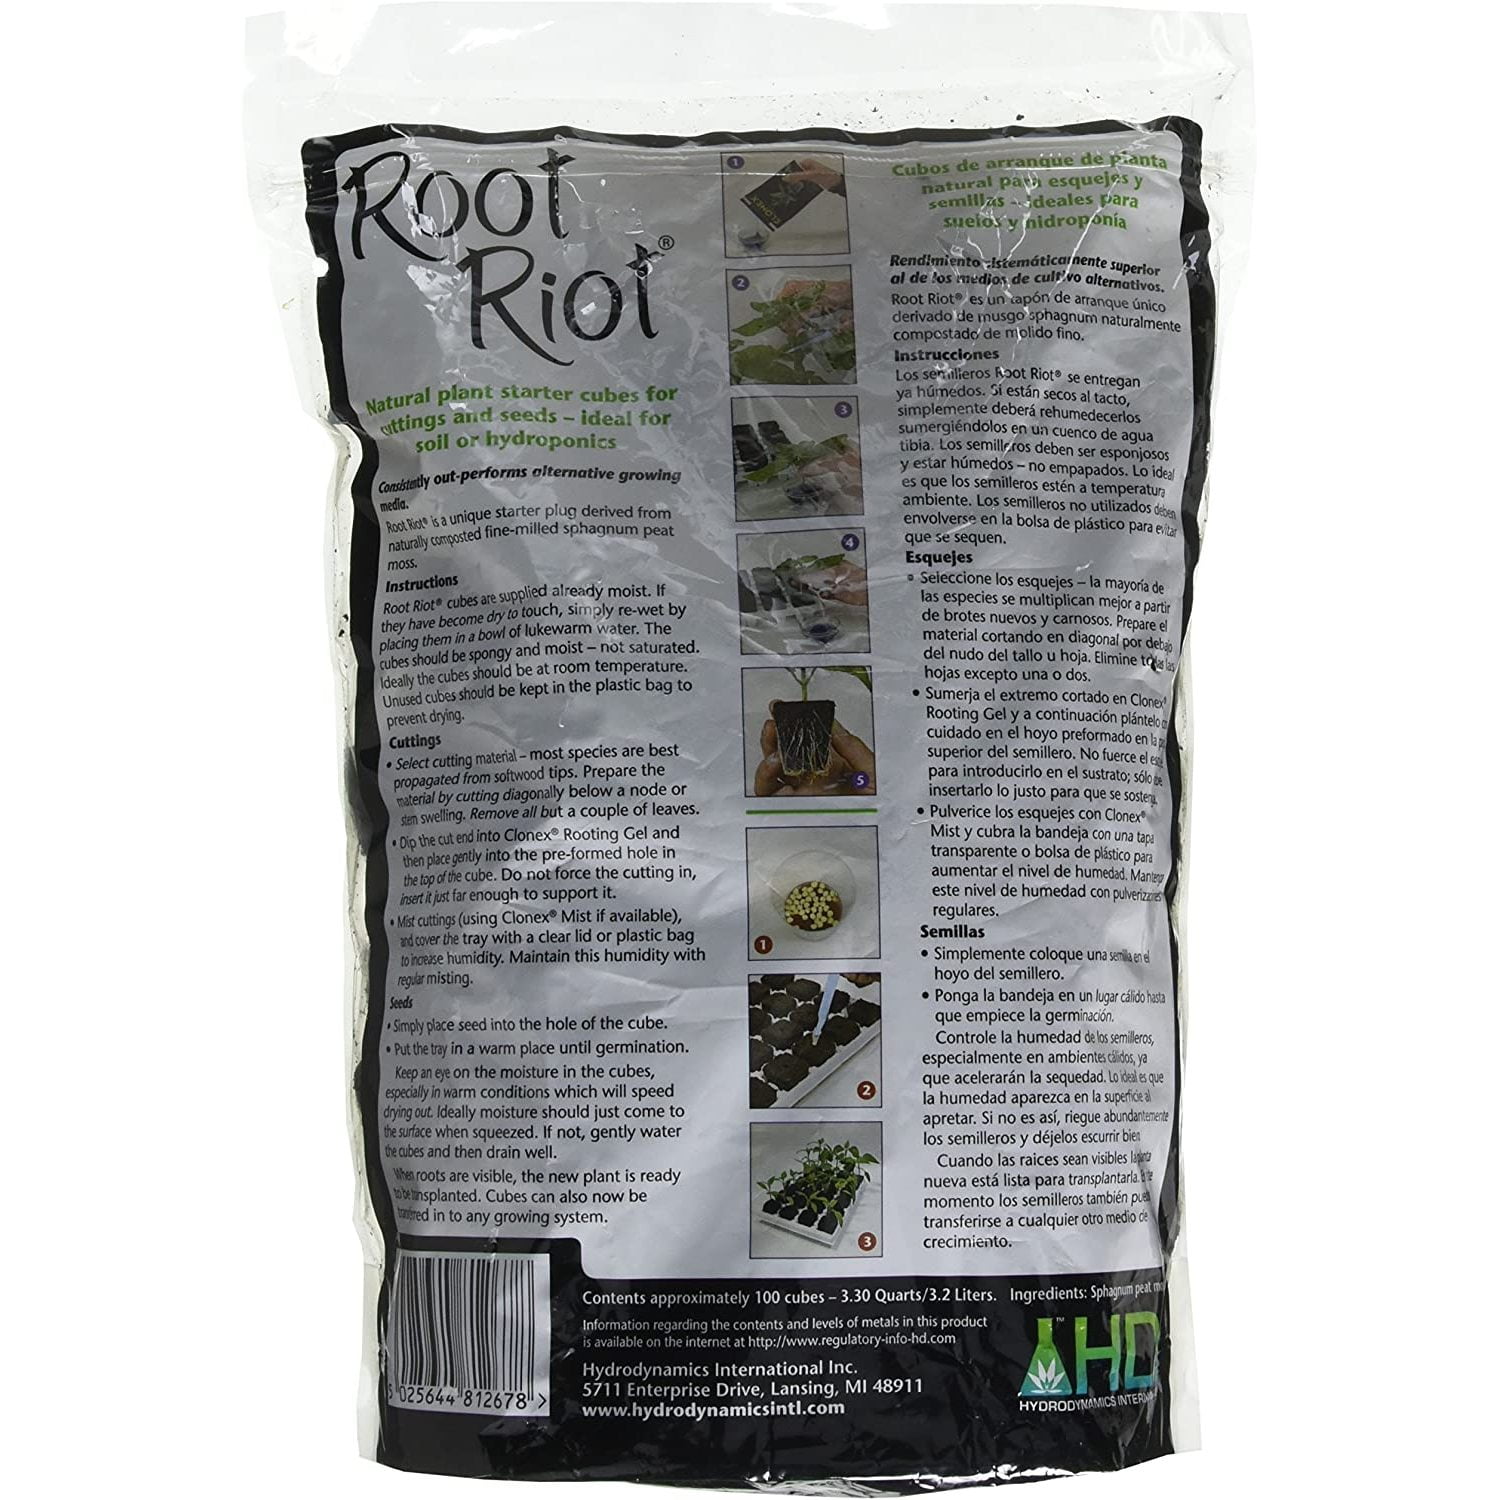 Root Riot Plugs, 100 Cubes - 2